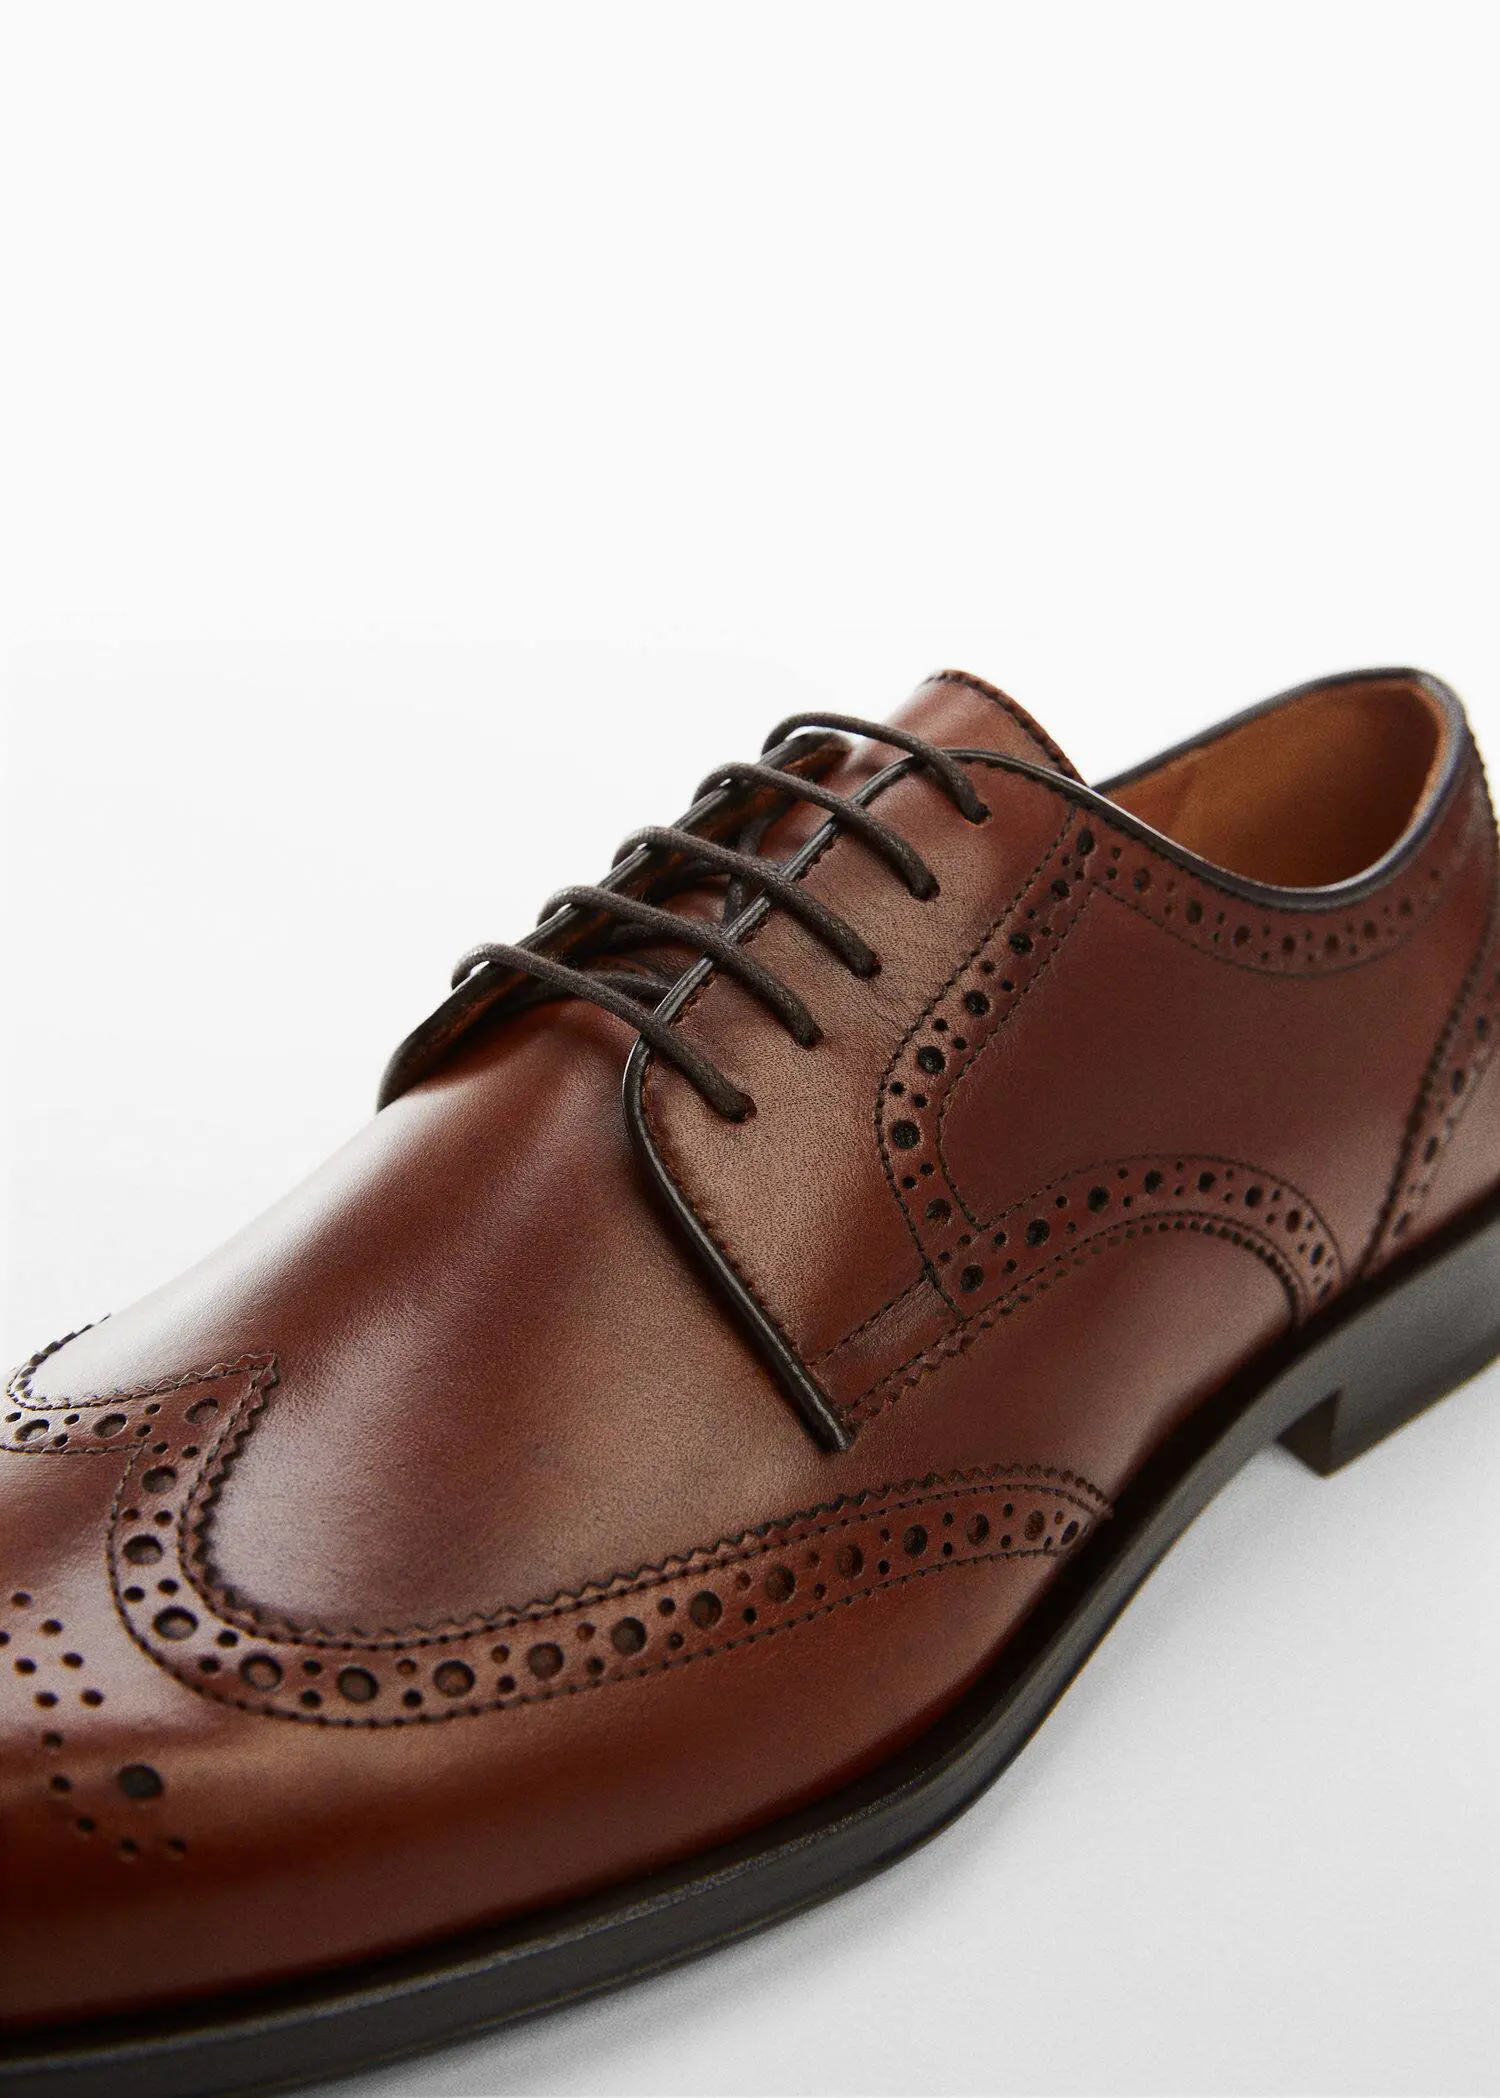 Mango Die-cut leather dress shoes. a close-up of a pair of brown leather shoes. 